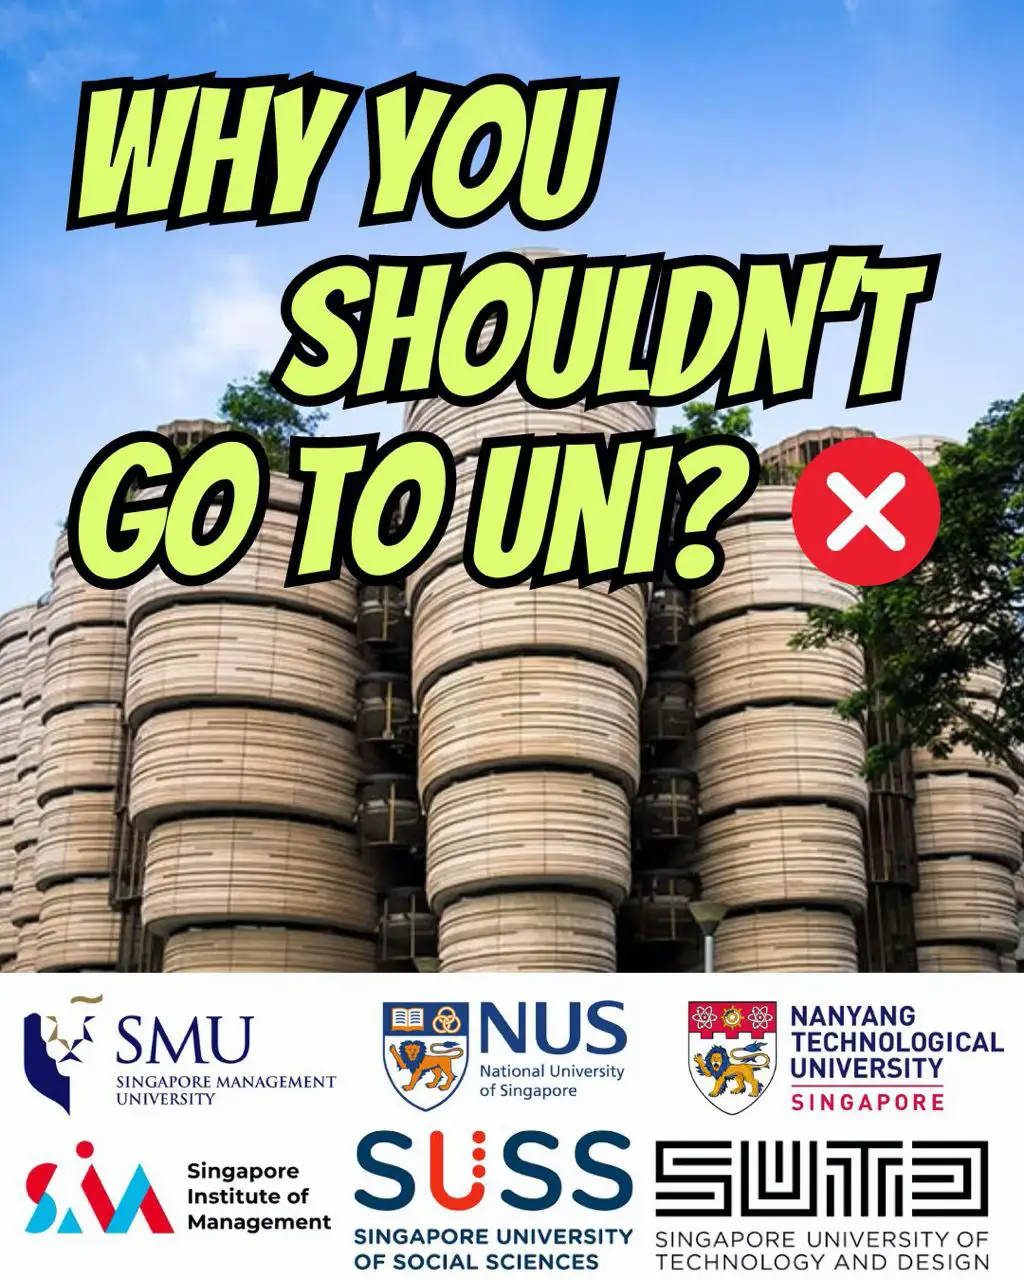 TO UNI OR NOT TO UNI? read this or regret! 🍋👩‍🎓's images(0)